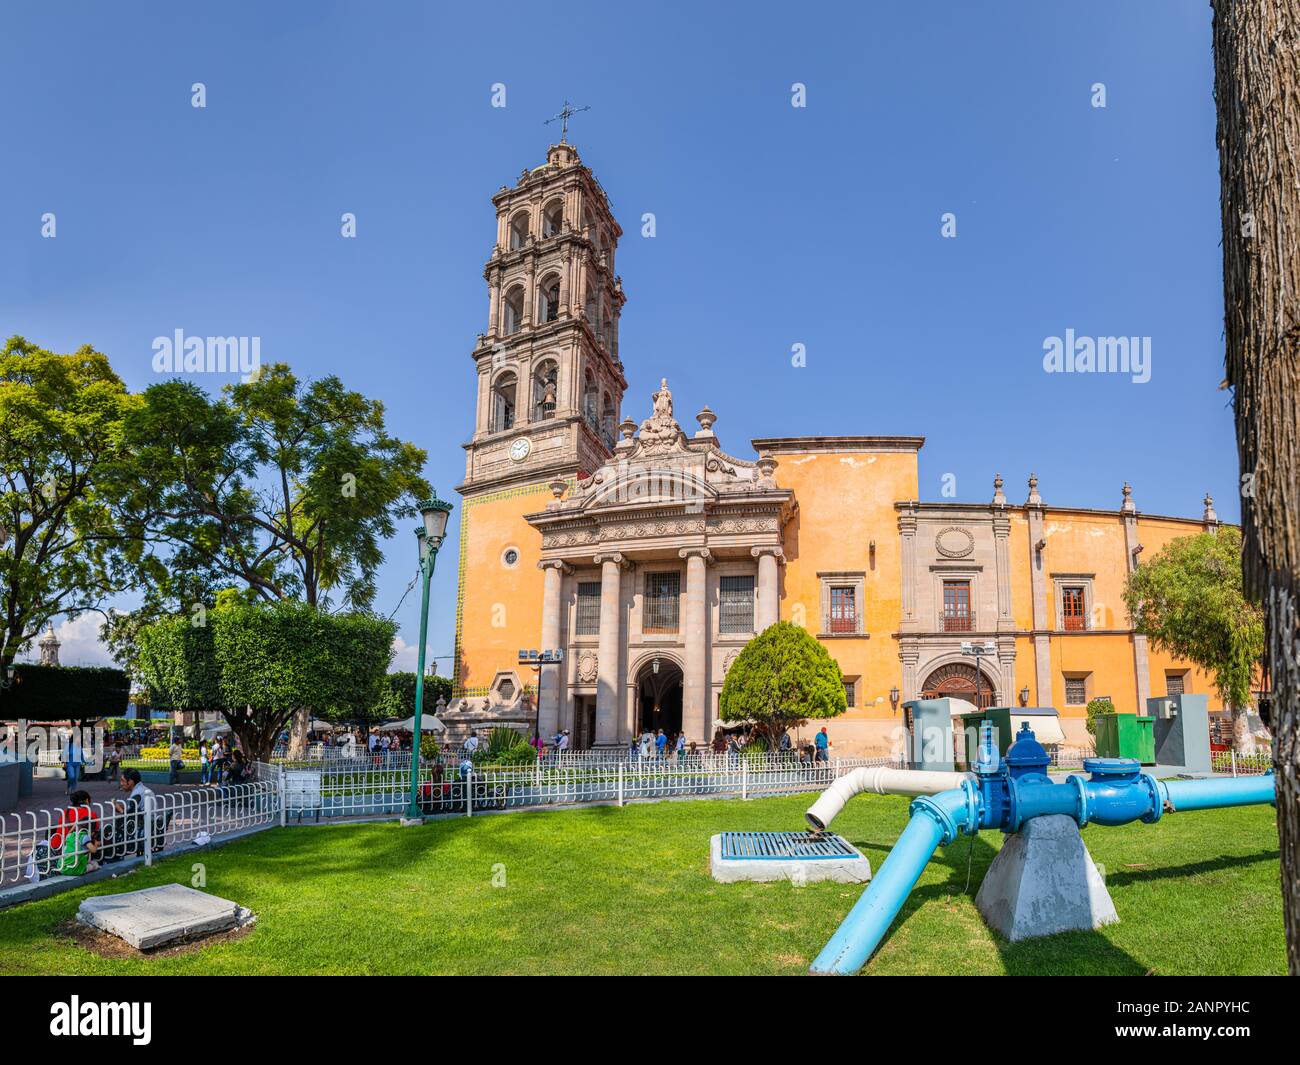 Celaya, Guanajuato, Mexico - November 24, 2019: People enjoying the day infront of the Immaculate Conception Cathedral Stock Photo